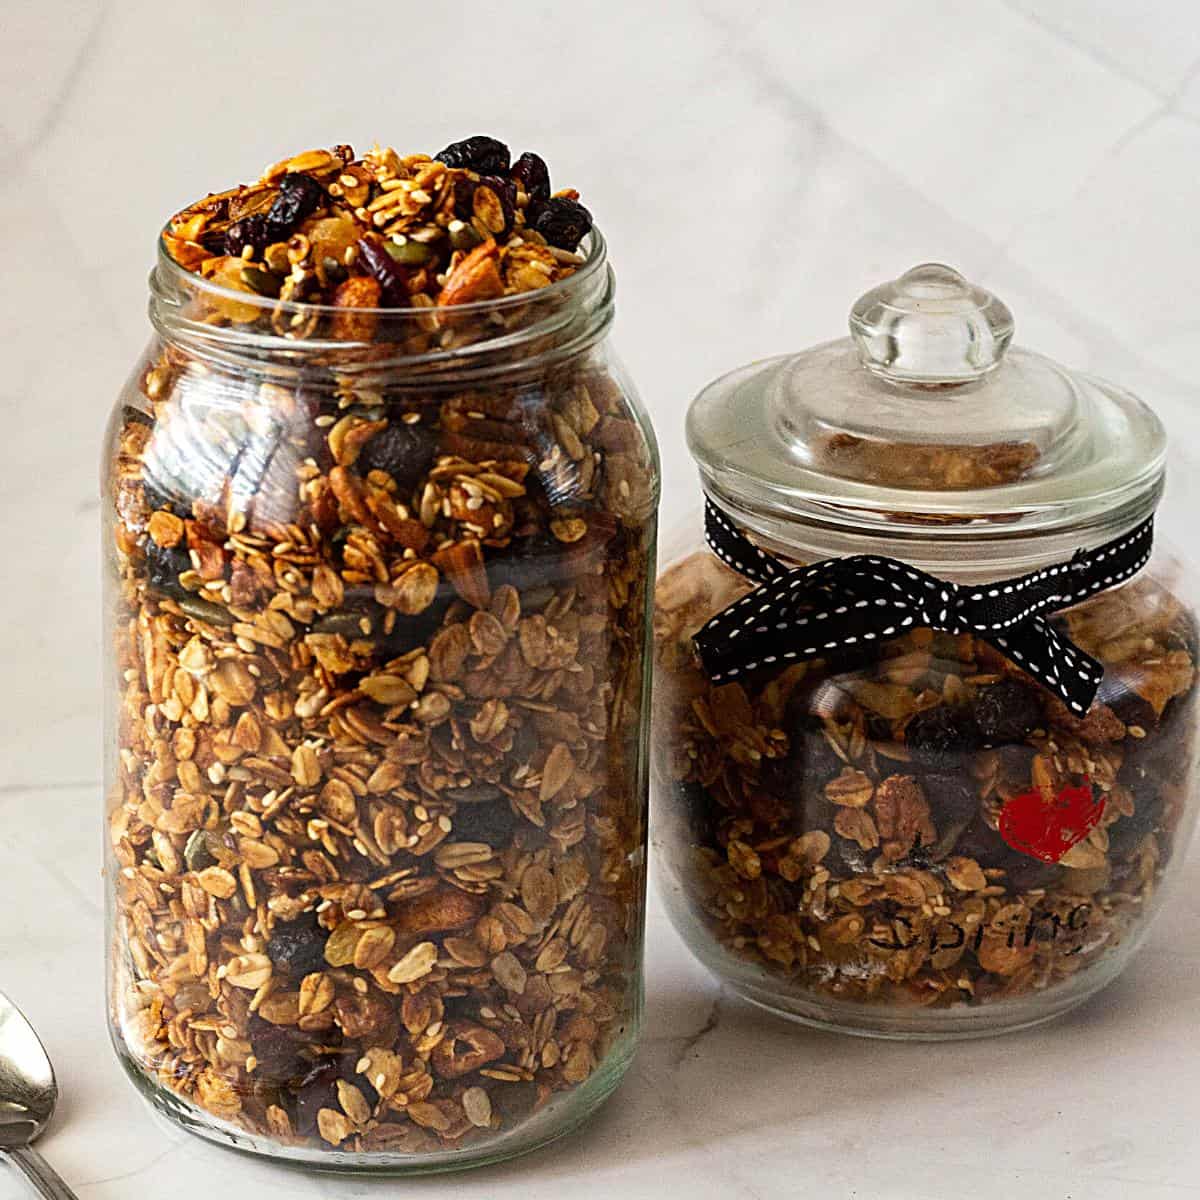 Jars of granola on the table.